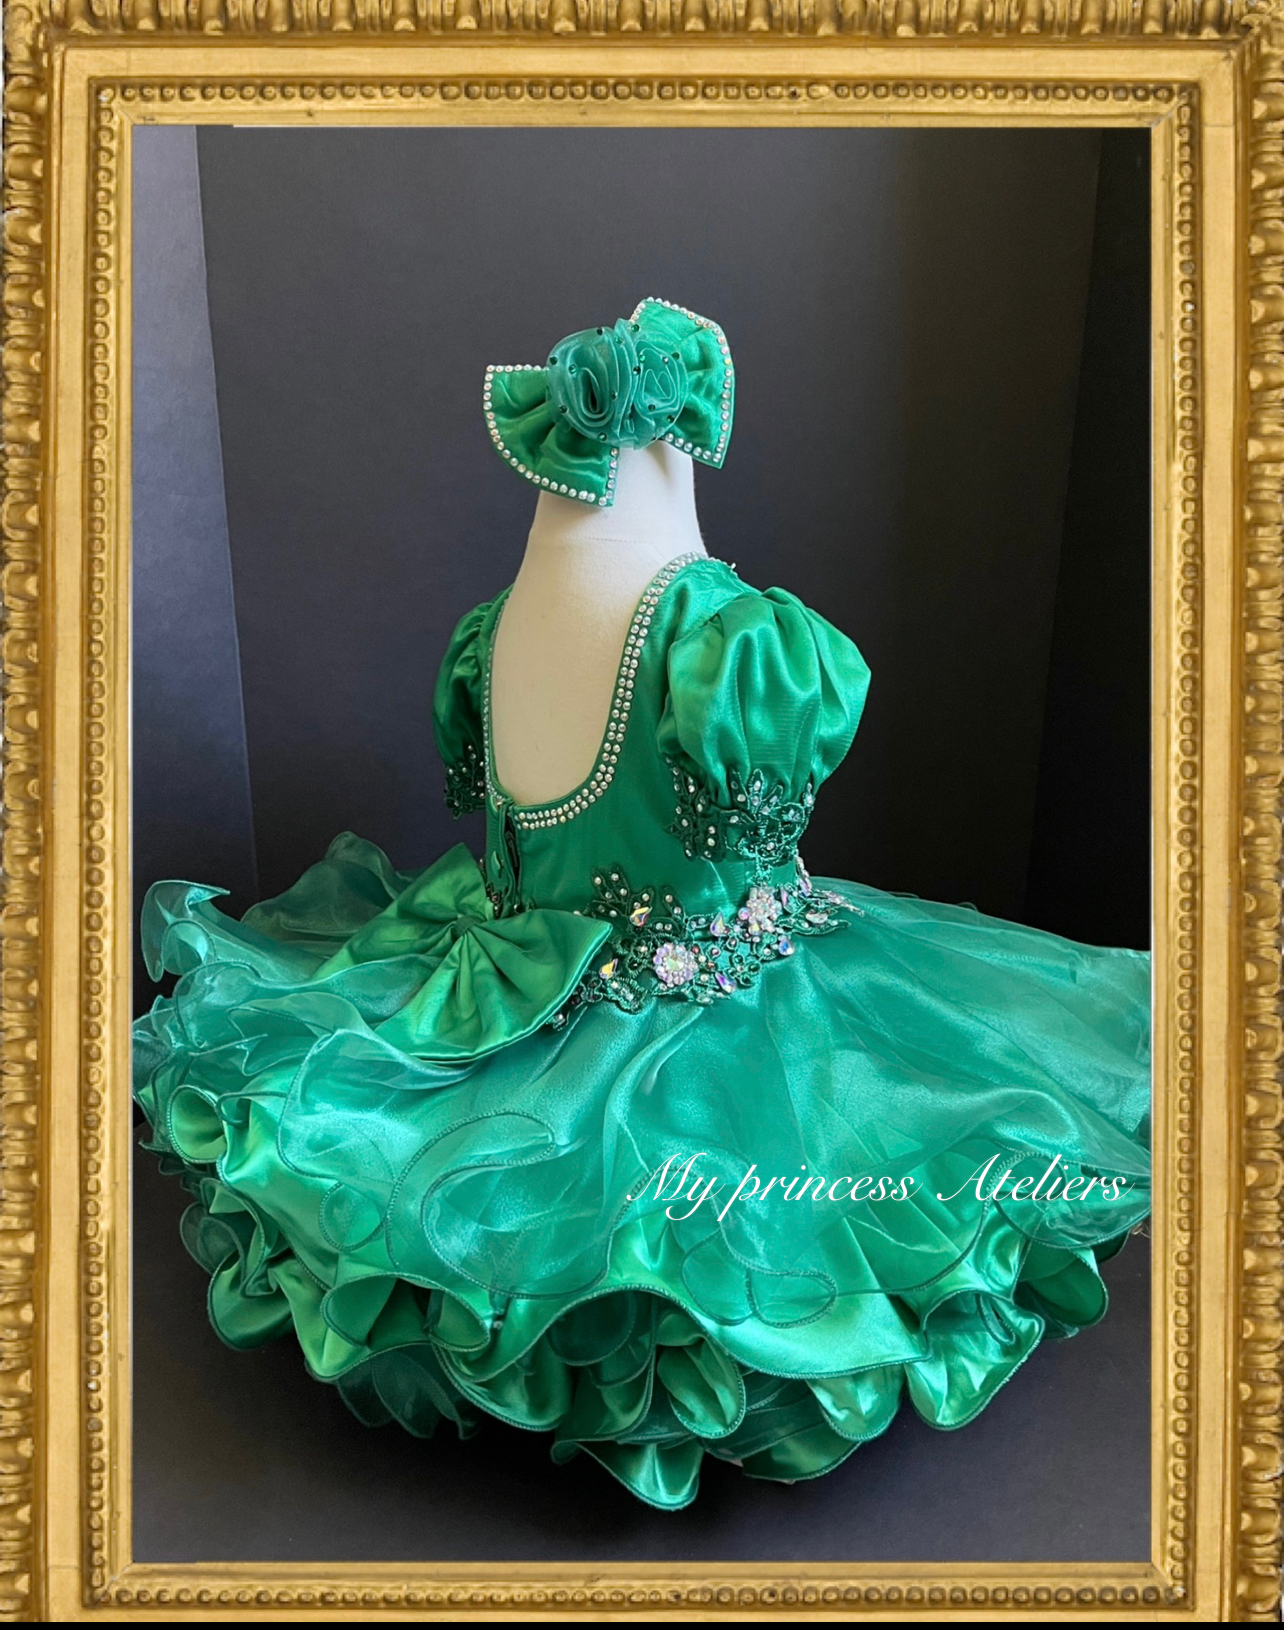 Natural pageant princess holiday couture birthday dress